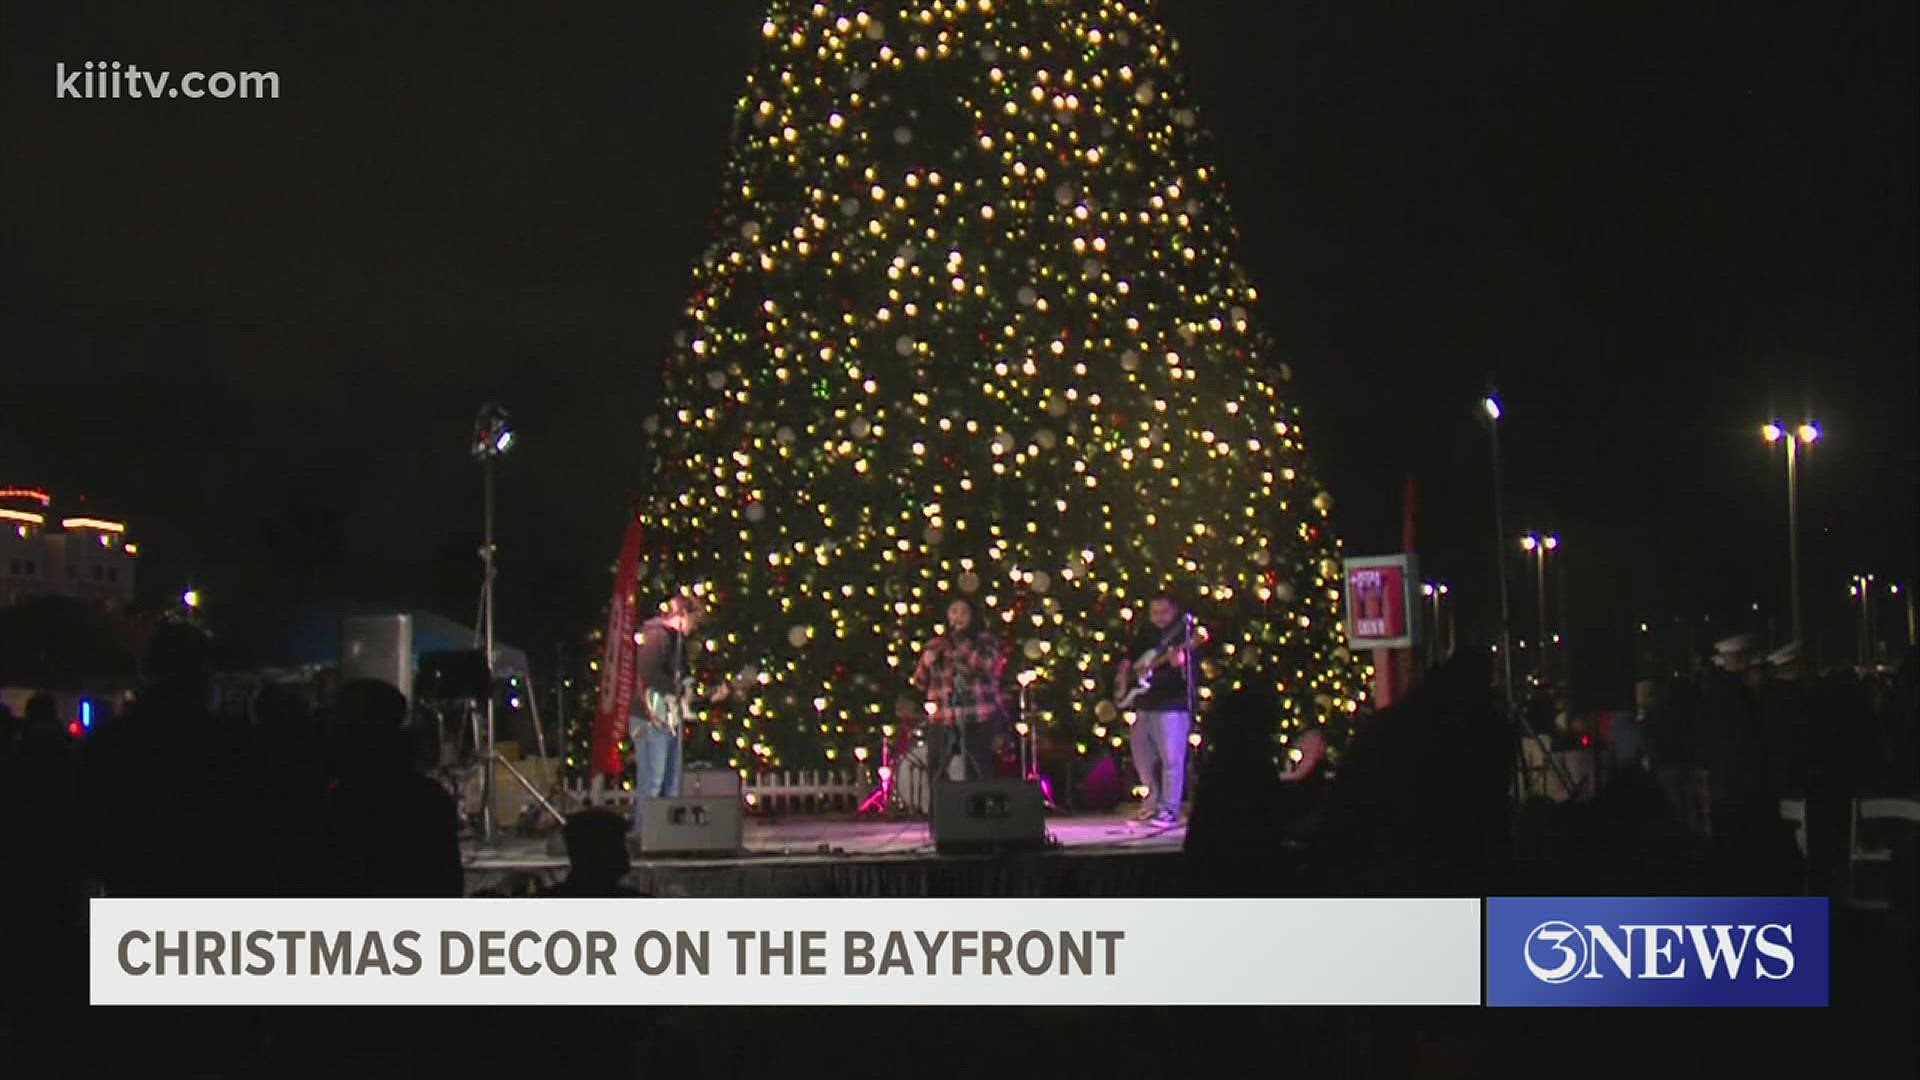 H.E.B. Christmas Tree lighting ceremony held at the Bayfront